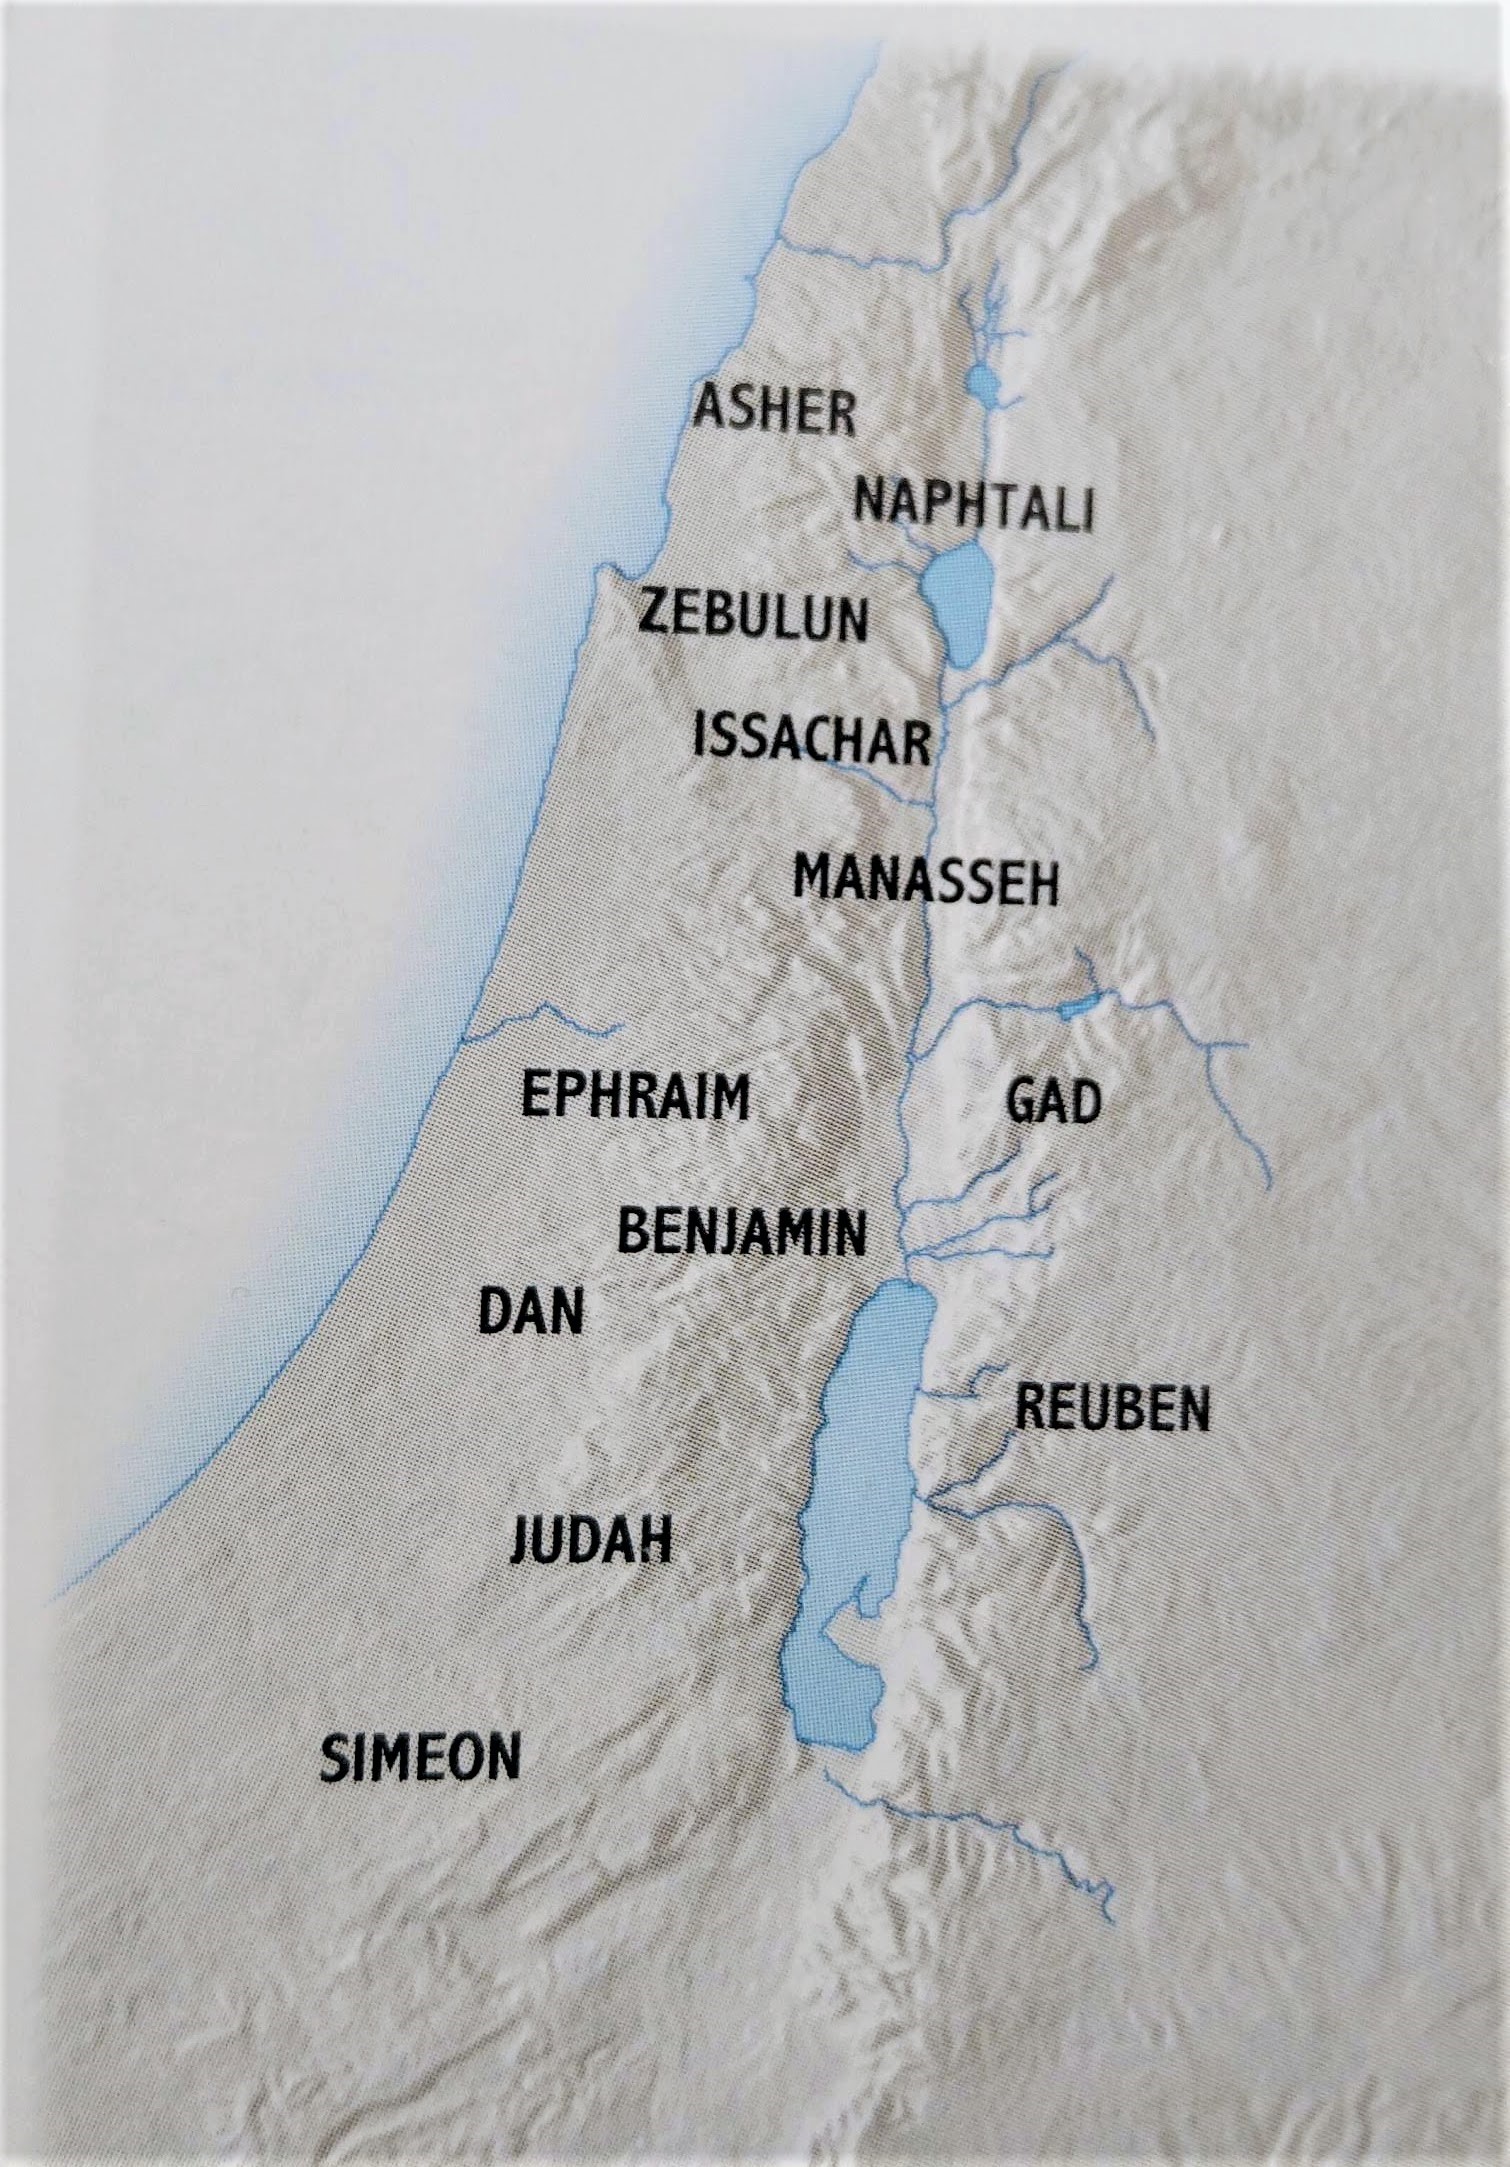 2 Tribes of Israel locations